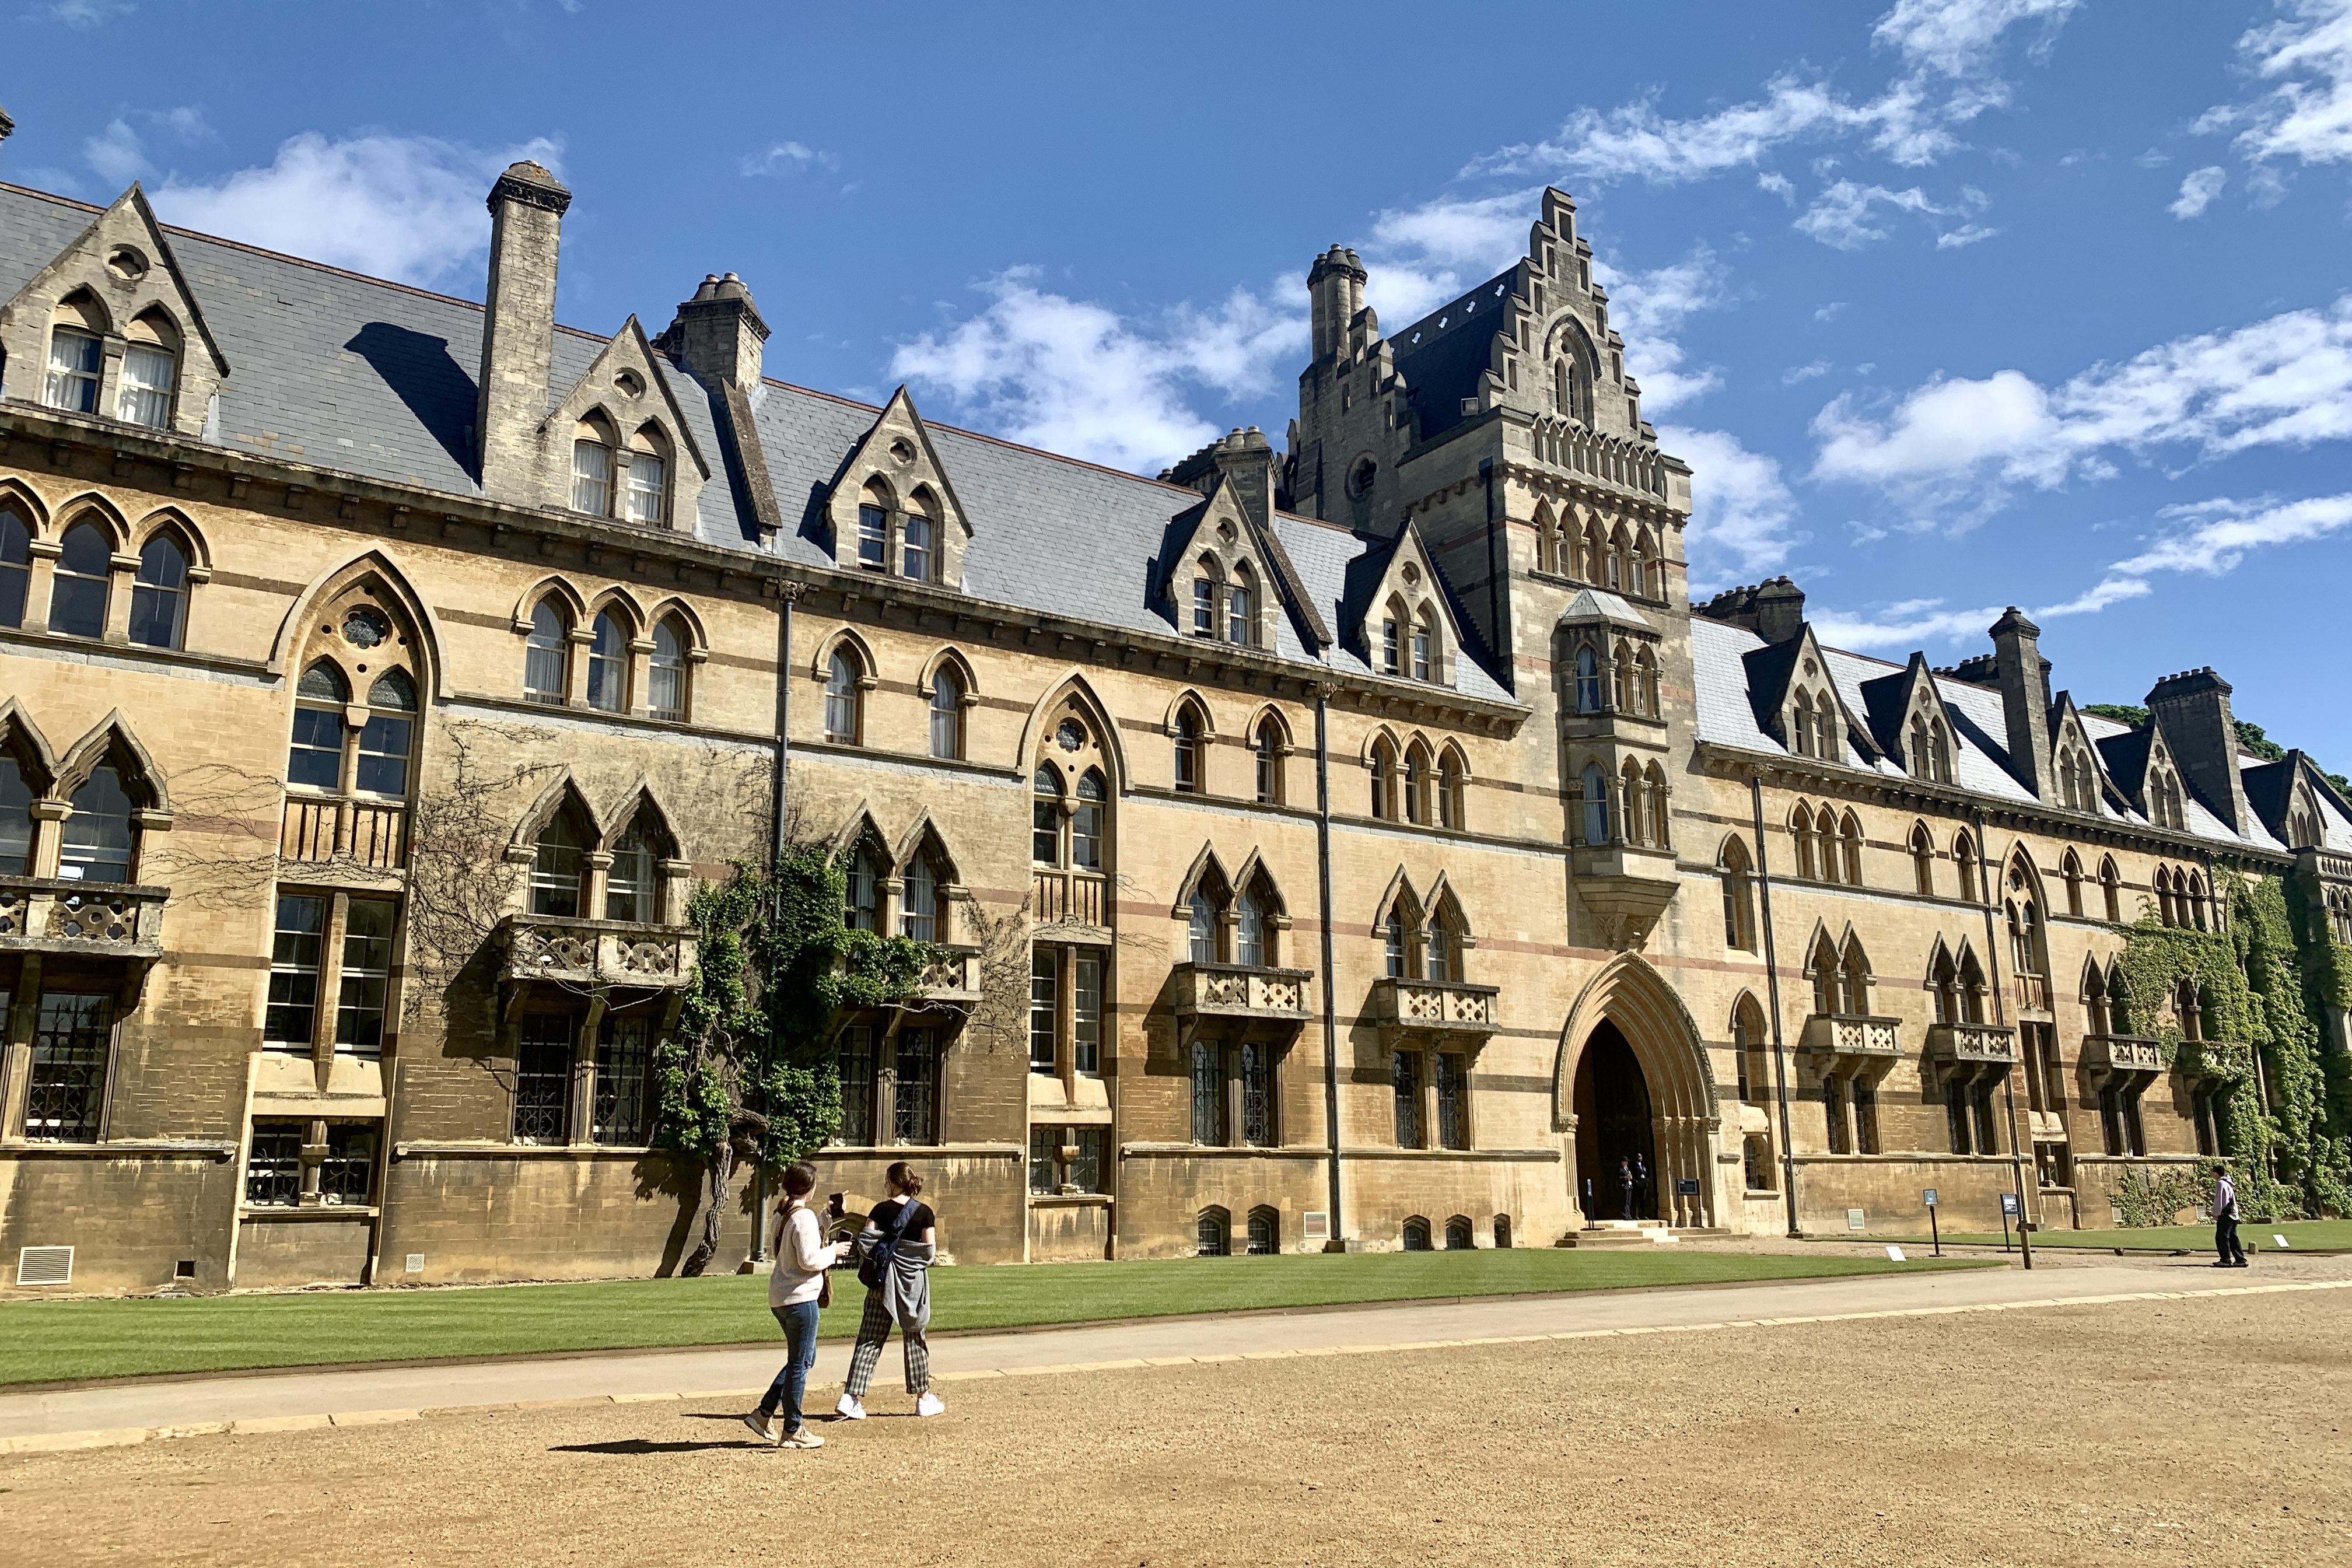 Christ's Church College in Oxford, England.